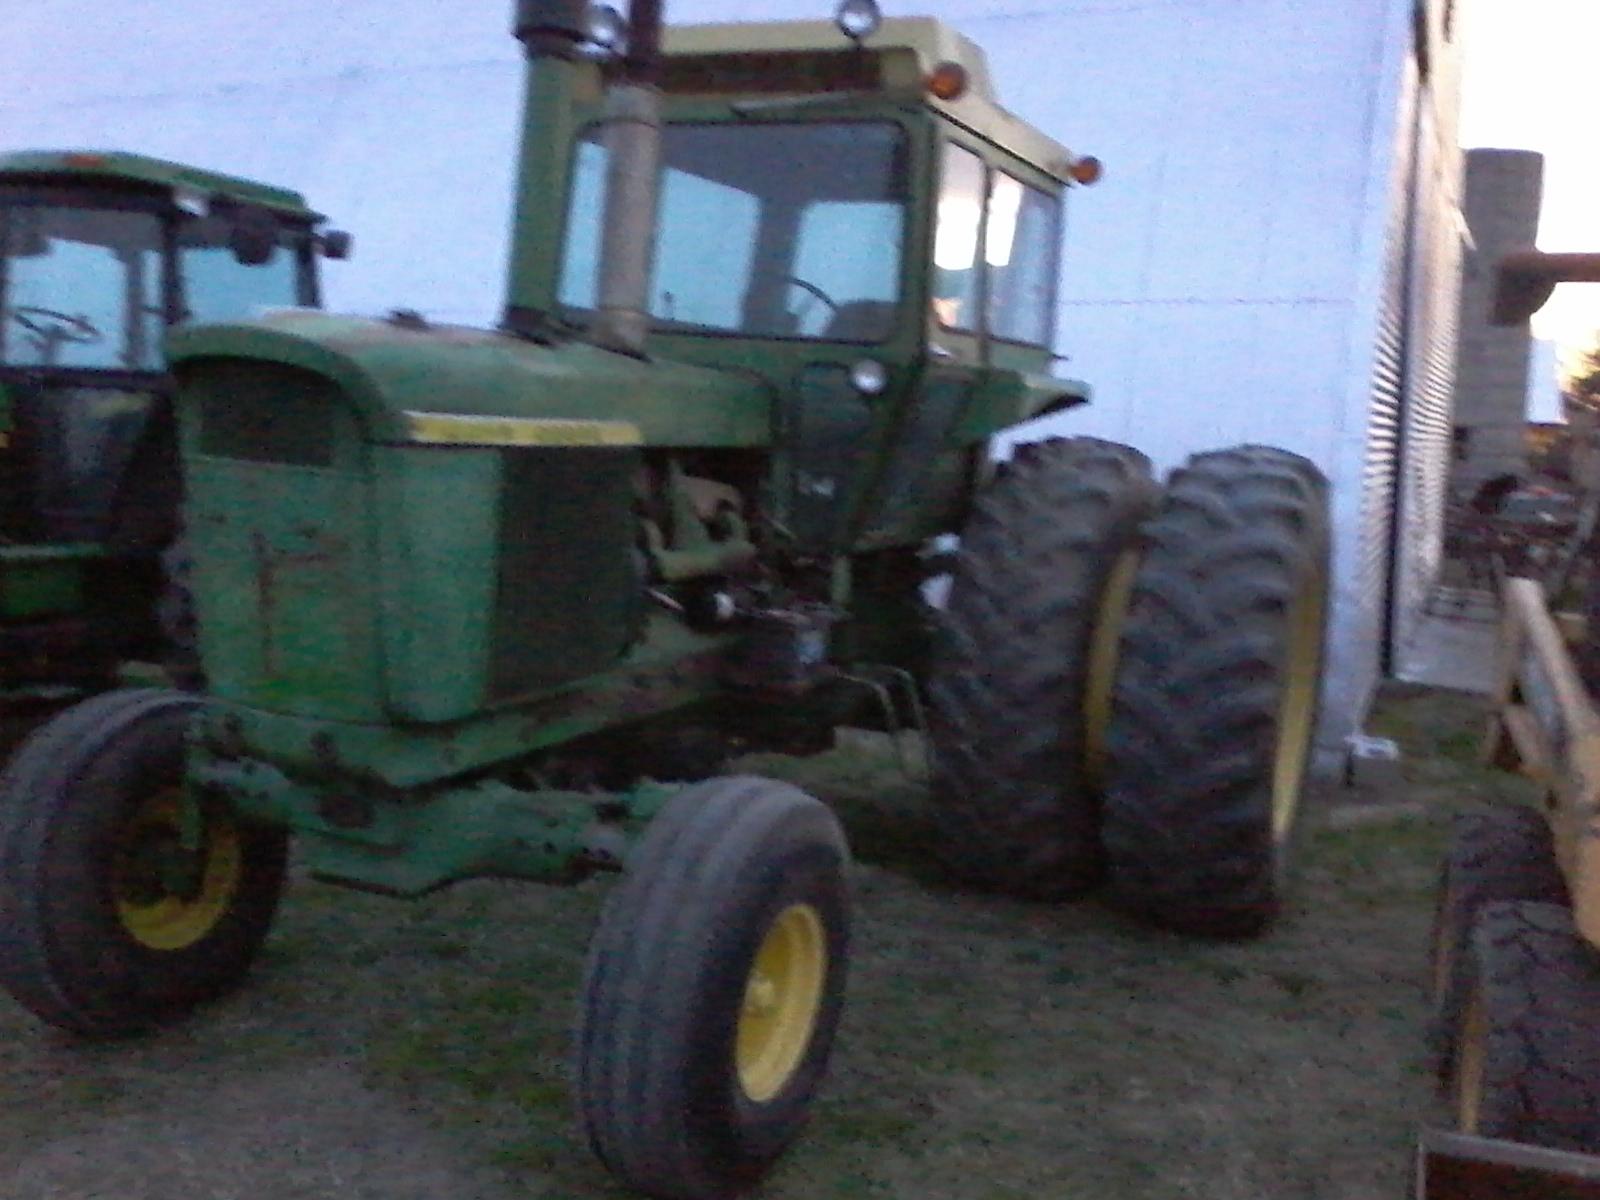 JD Tractor